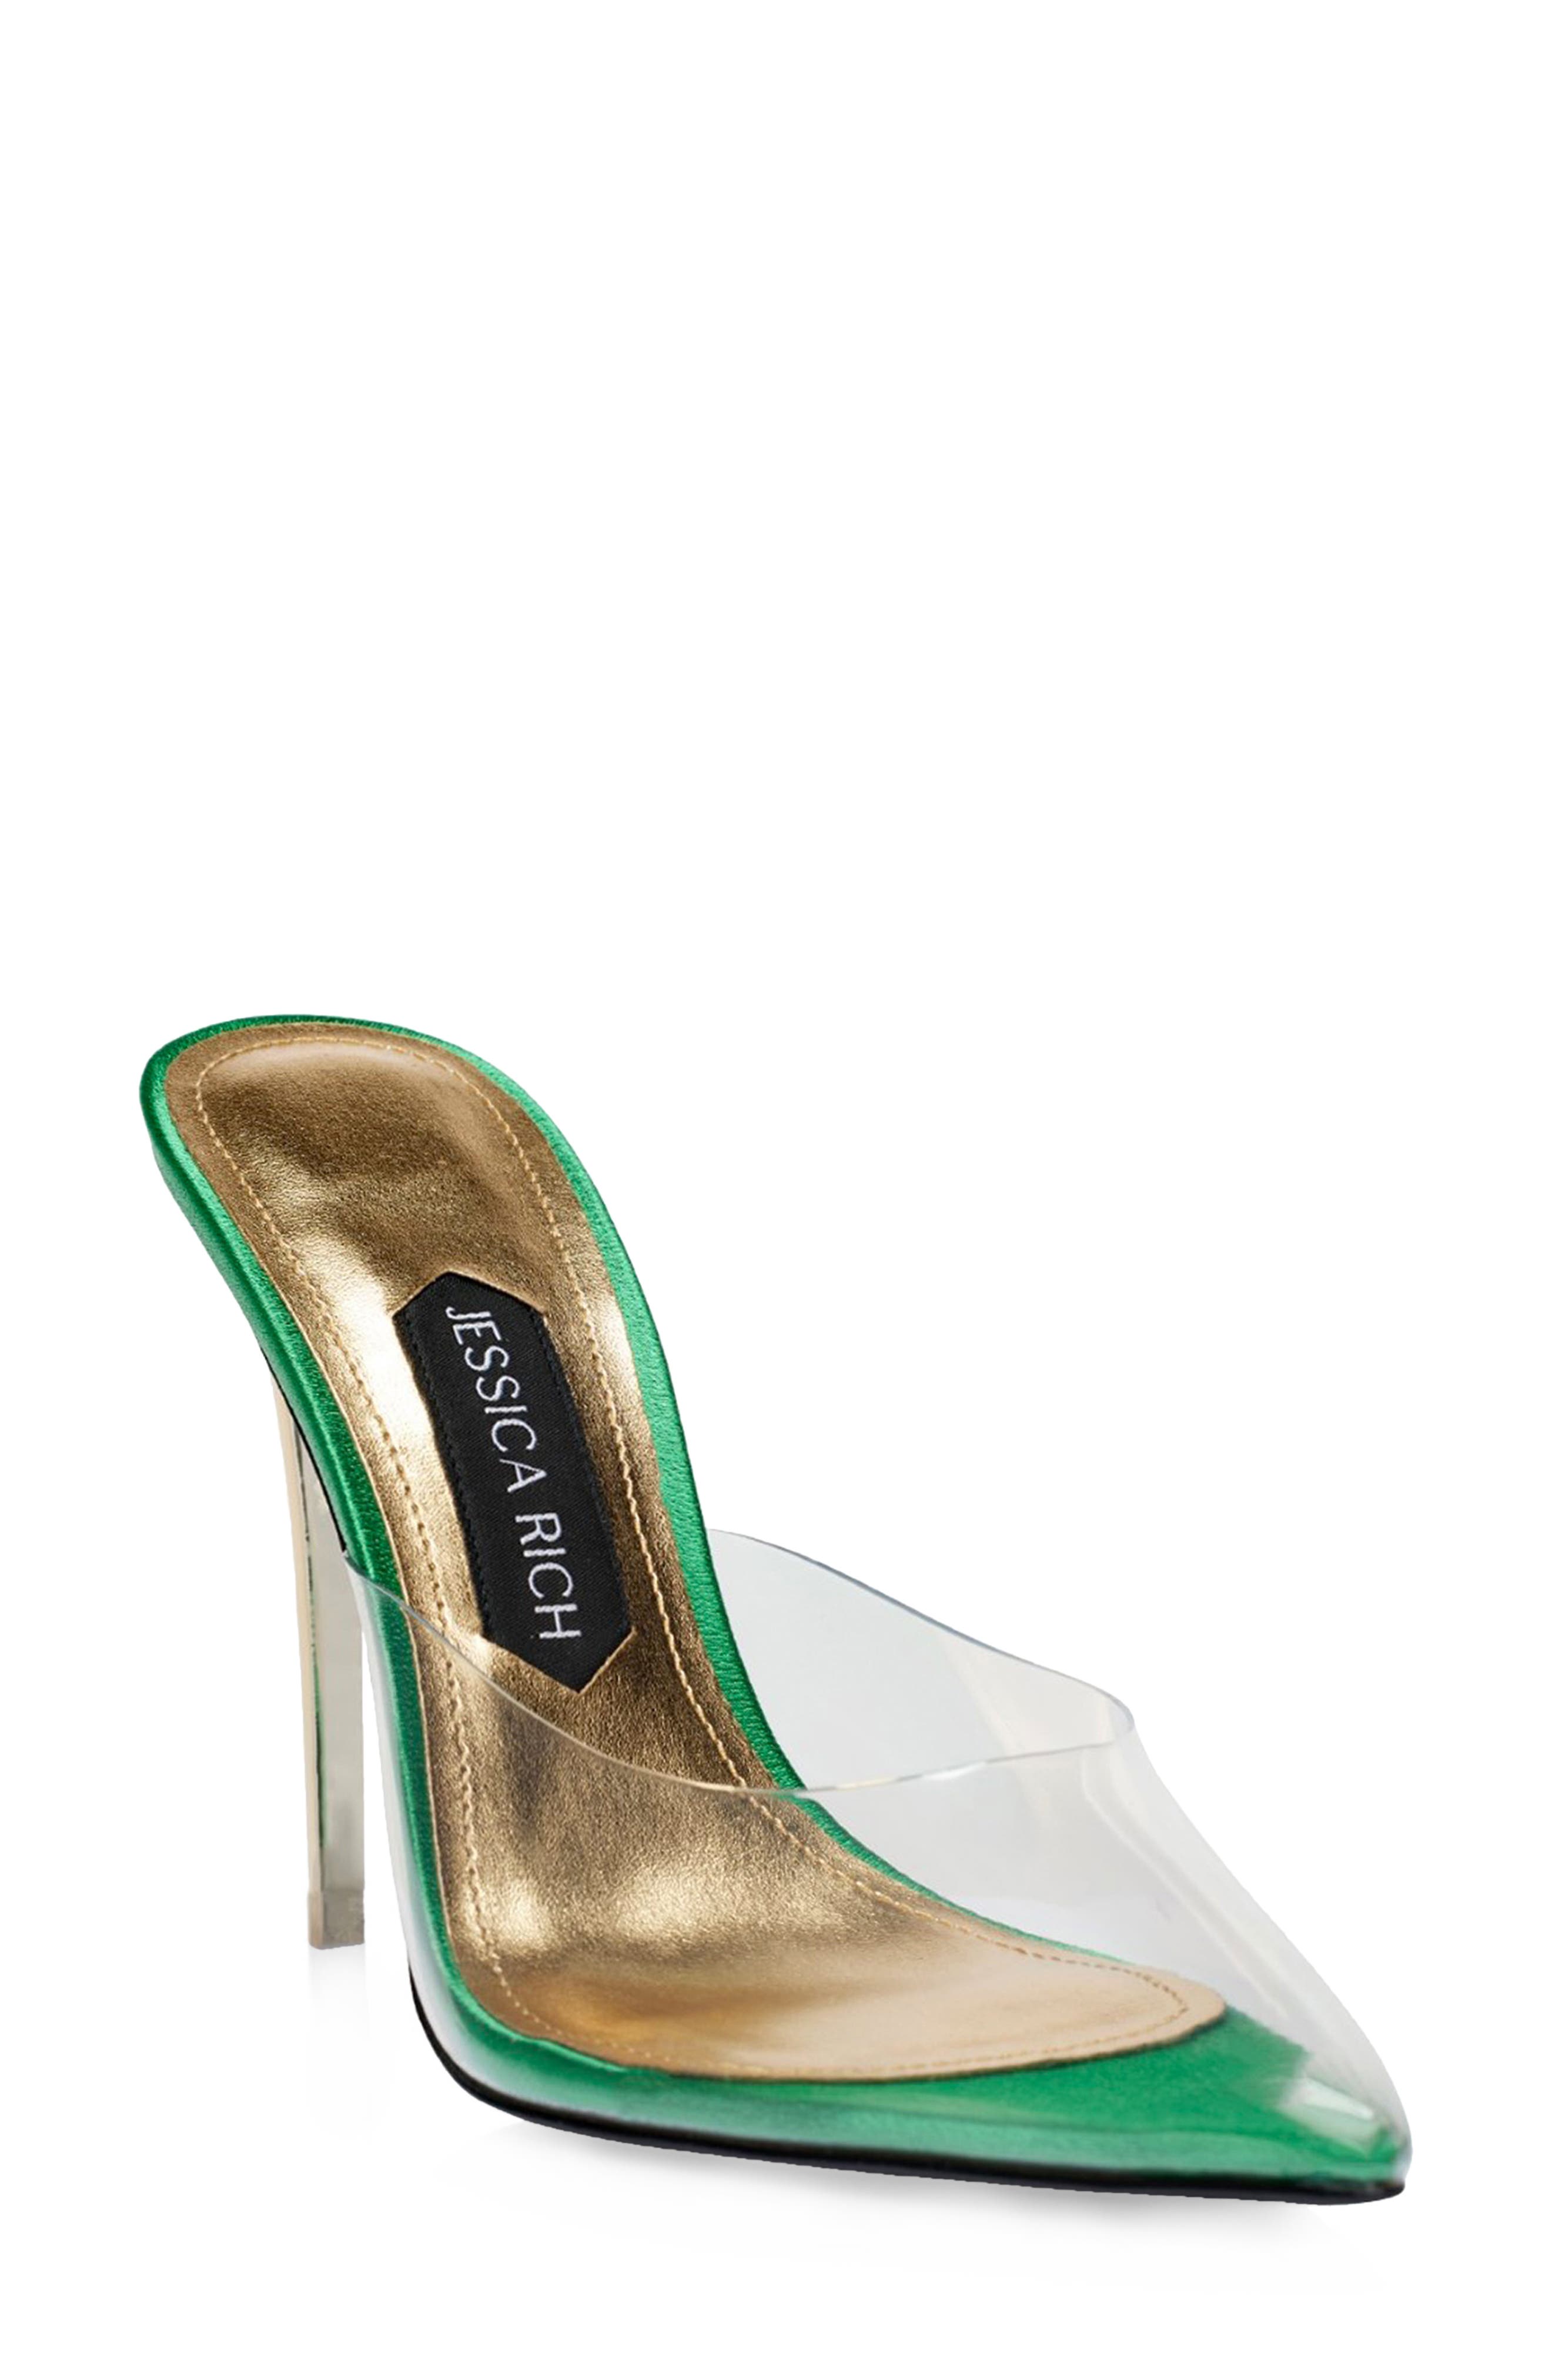 JESSICA RICH So Bossy Pointed Toe Pump